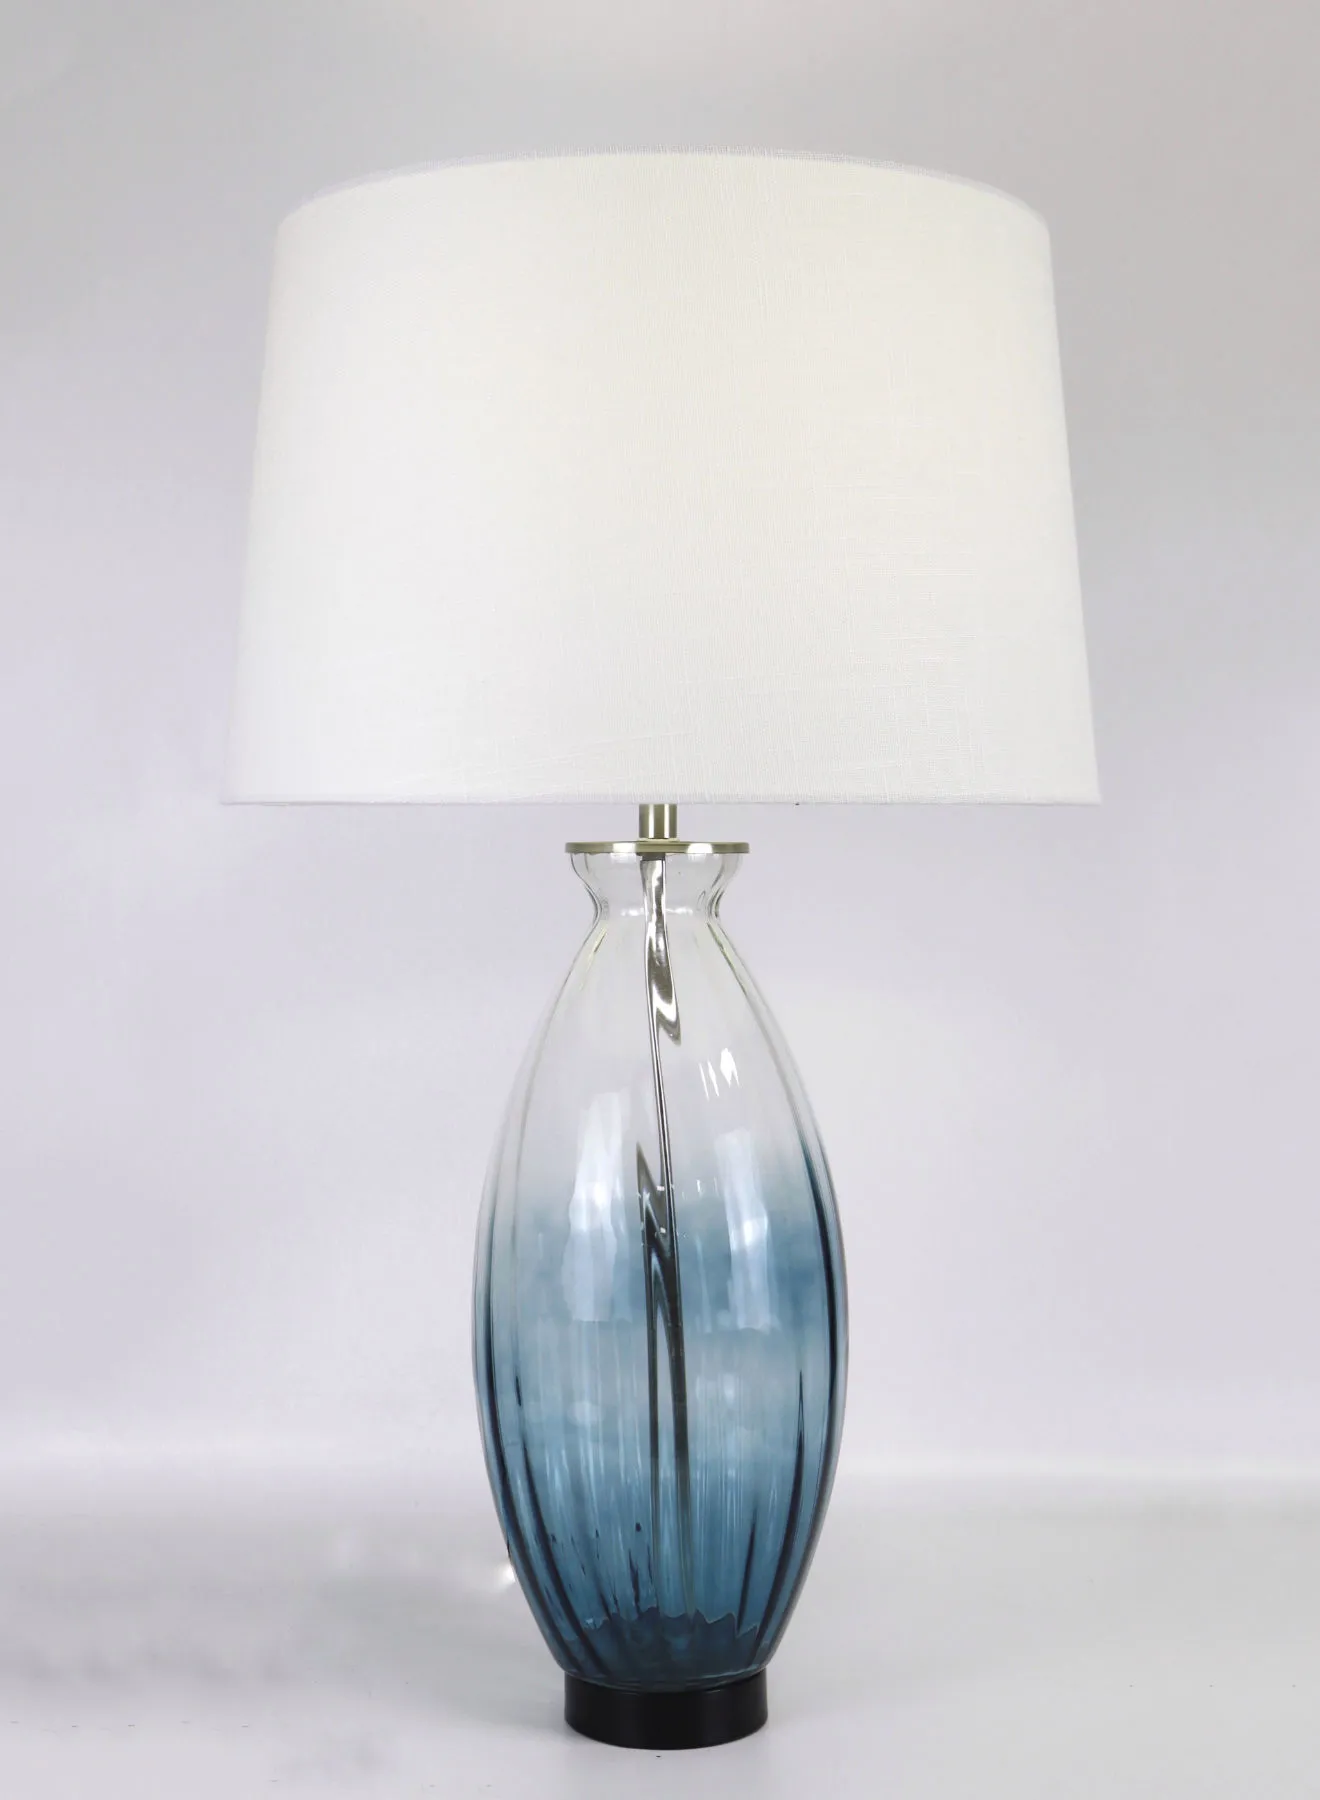 Switch Modern Design Glass Table Lamp Unique Luxury Quality Material for the Perfect Stylish Home RSN71030 Blue 17 x 29 Blue 17 x 29inch